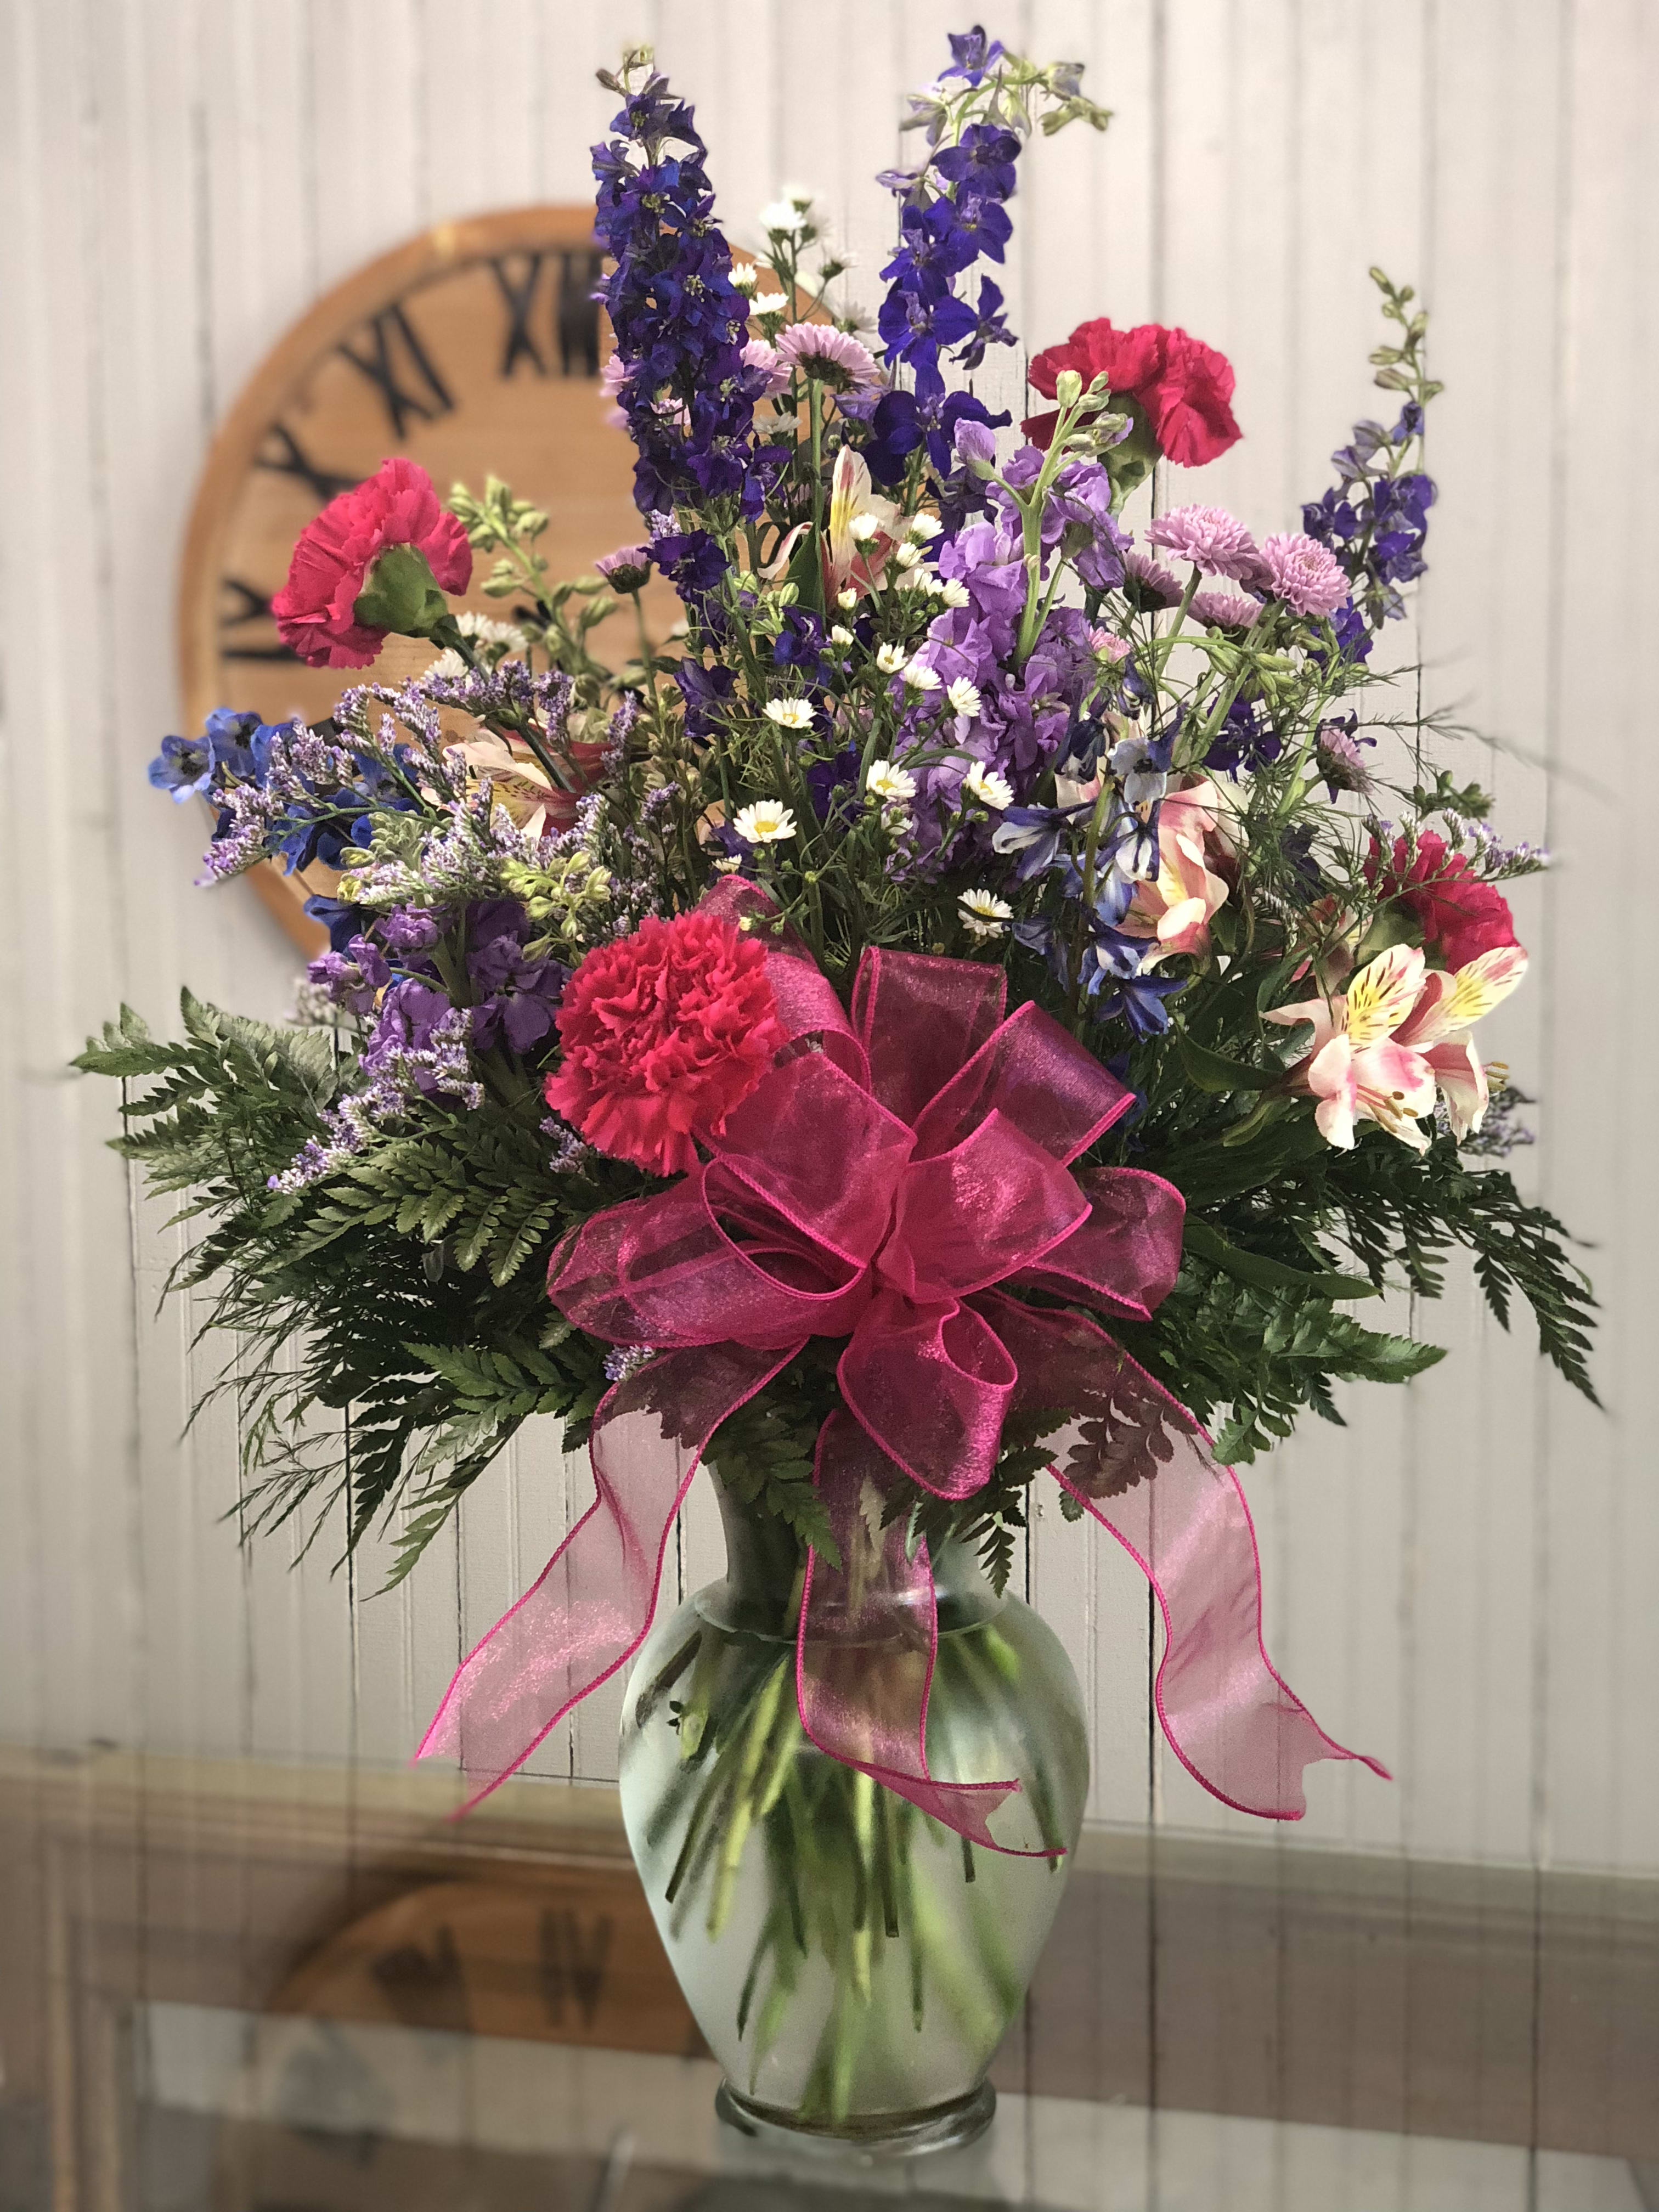 Purple Meadow - This is a large bouquet full of wildflowers in the colors of pinks, purples, and blues.  It looks as though they have been picked freshly from a meadow.